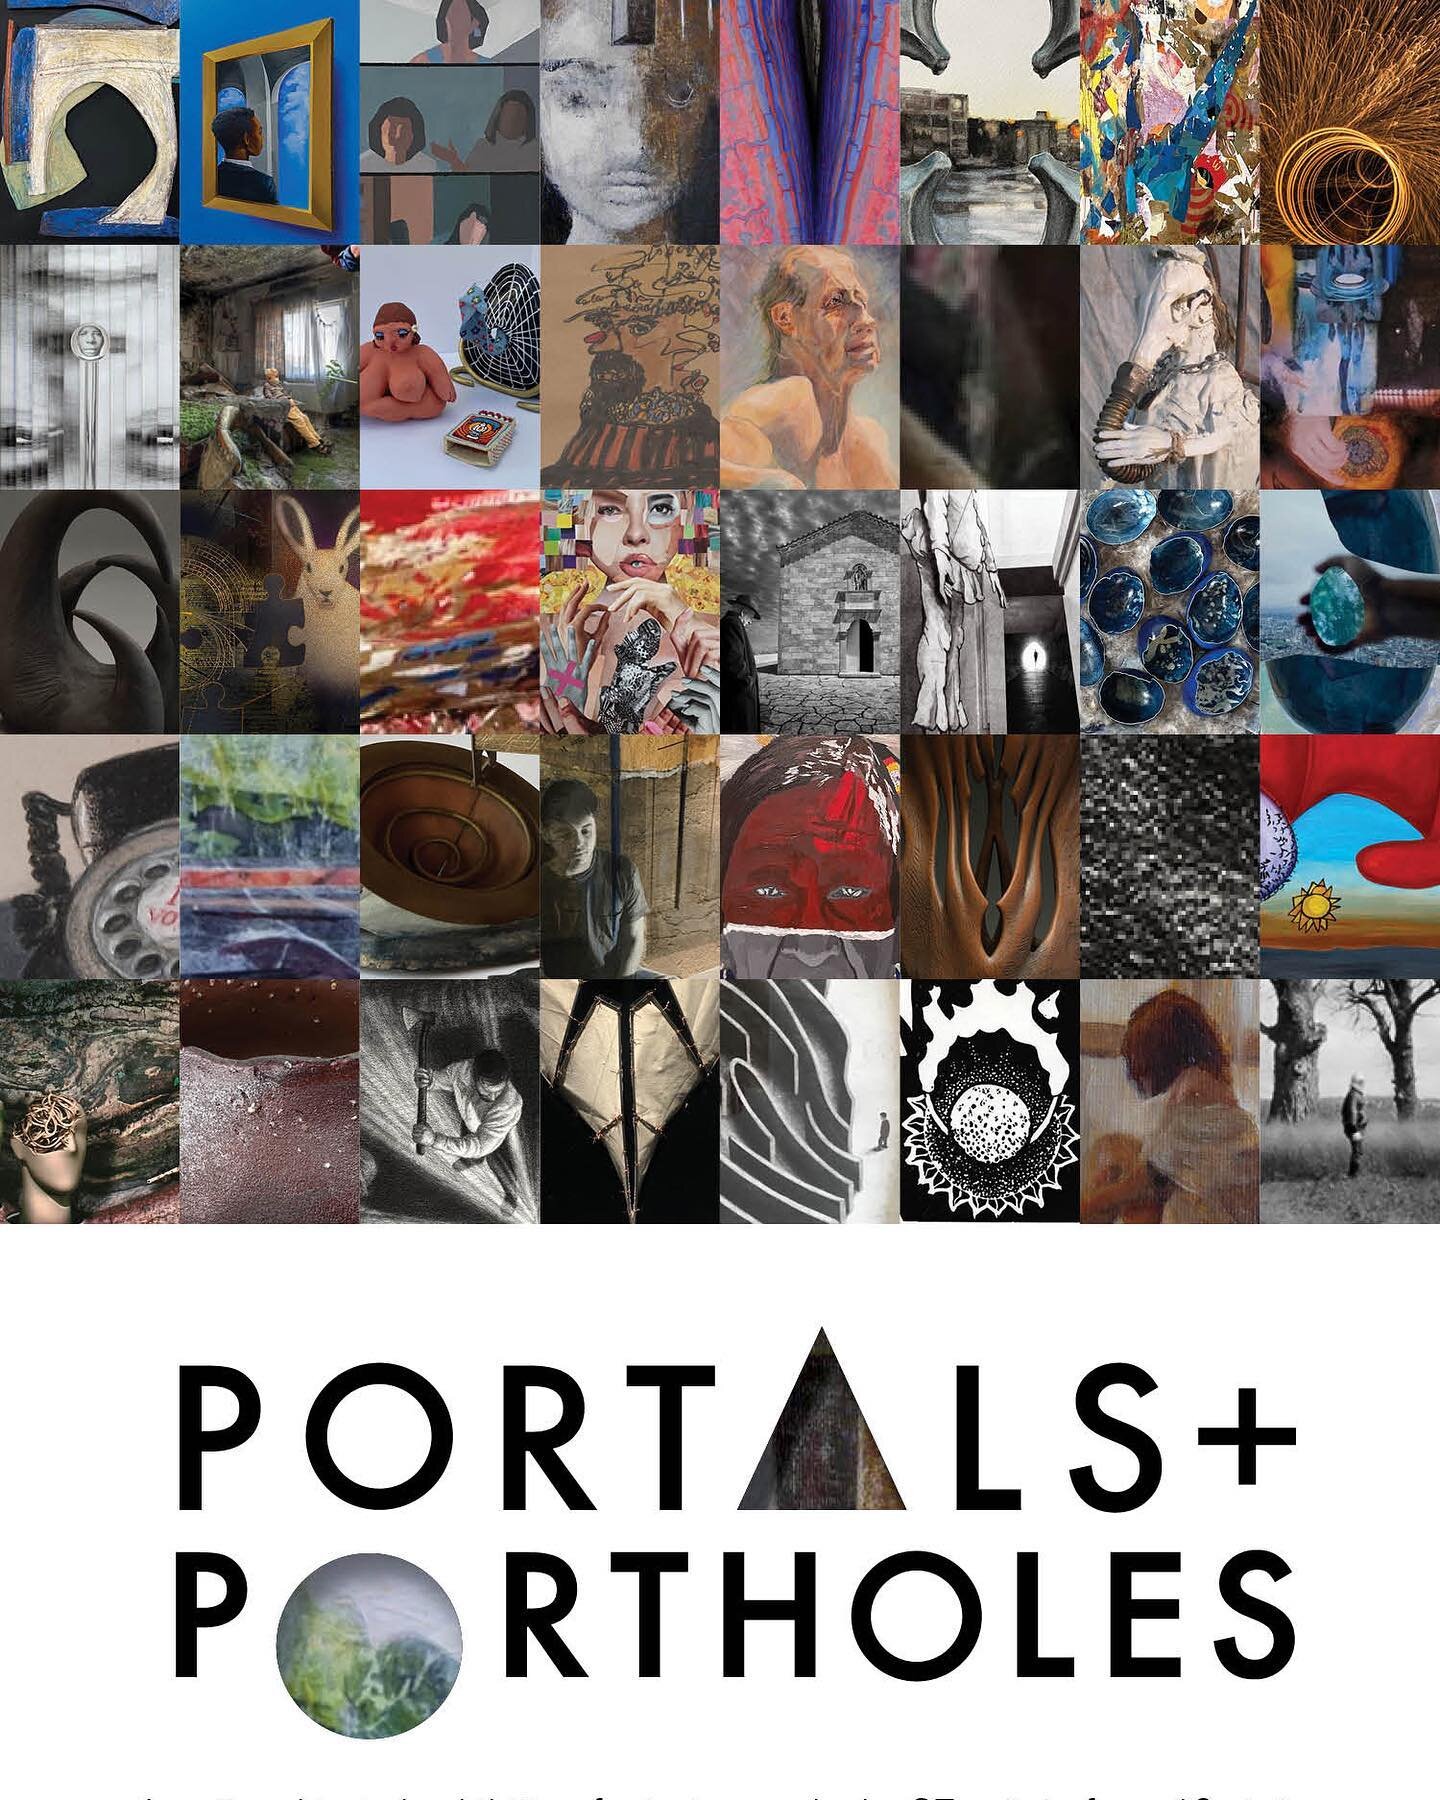 Excited to be included in the Portals and Portholes National Juried Exhibition at Main Street Arts this spring. 
.
The show features painting, sculpture, photography, and mixed media work by 37 artists from 10 states. The themes of artwork in this ex